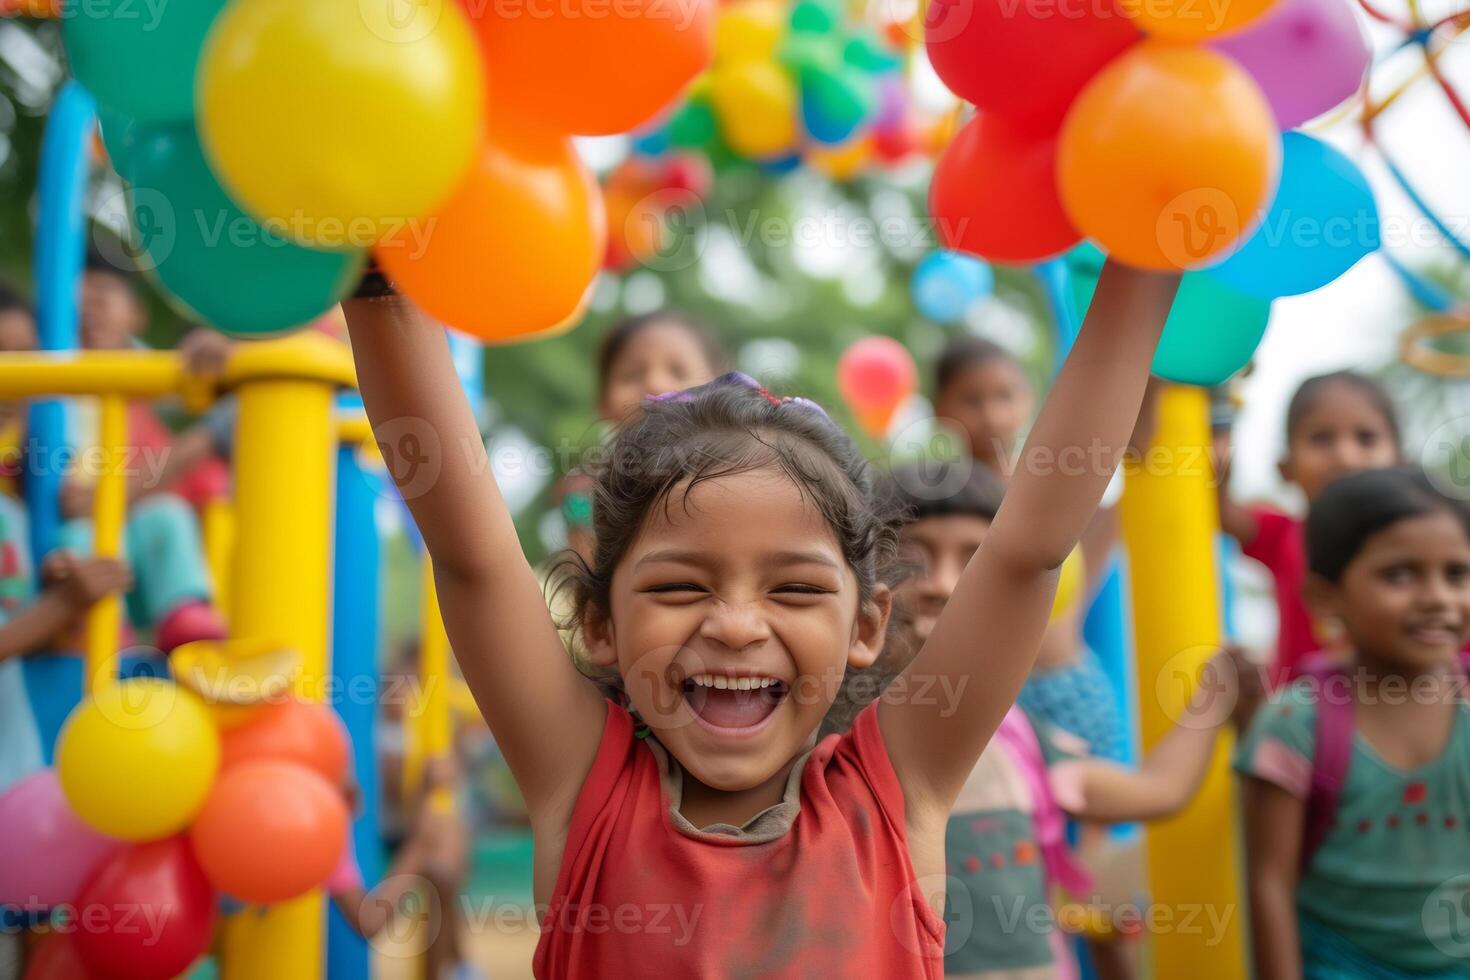 pure joy and innocence of children playing in a colorful playground photo